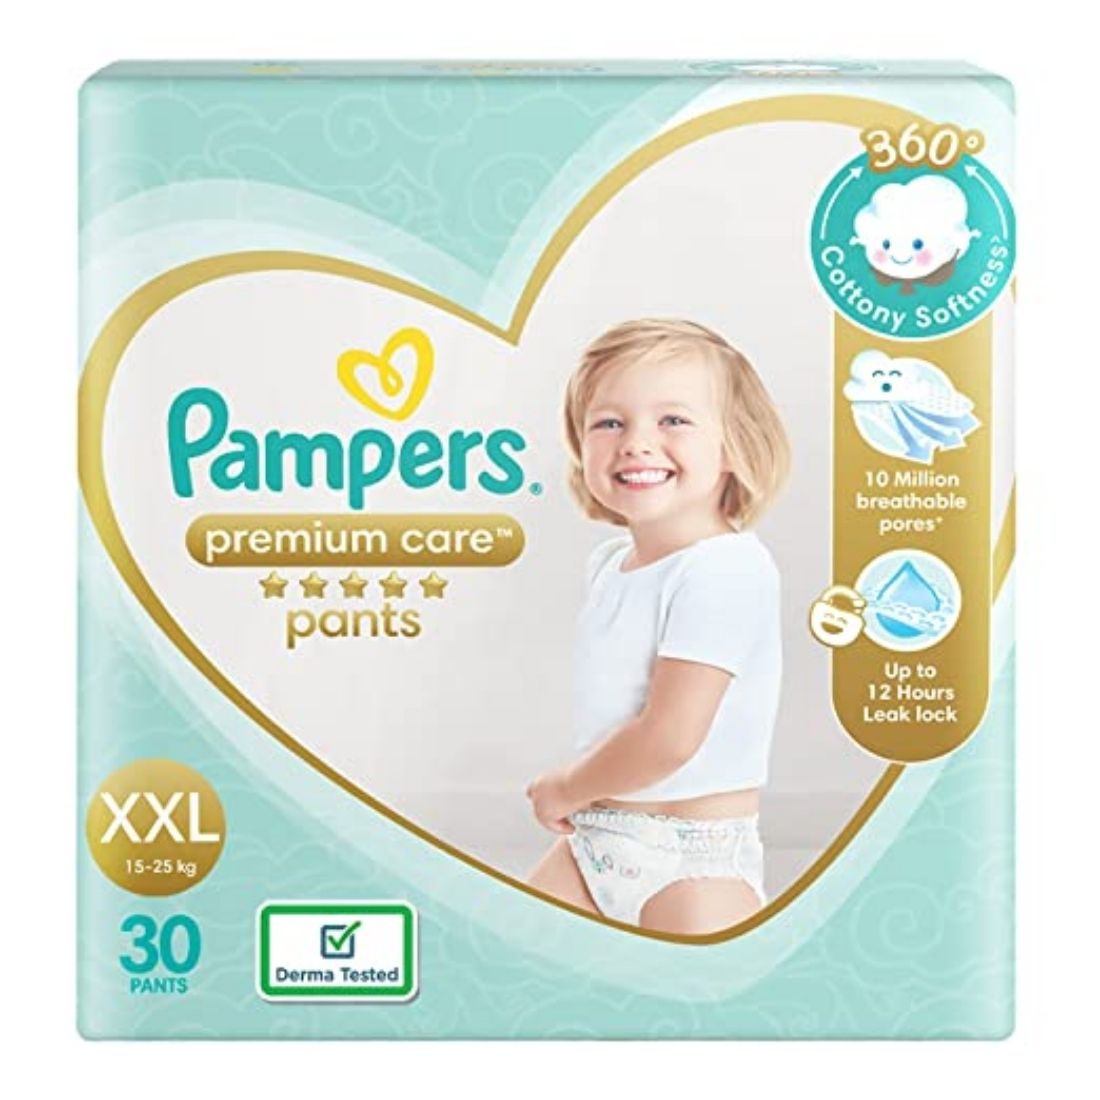 Buy Bumtum Baby Diaper Pants, Small Size, 156 Count, Double Layer Leakage  Protection Infused With Aloe Vera, Cottony Soft High Absorb Technology  (Pack of 2) Online at Low Prices in India - Amazon.in